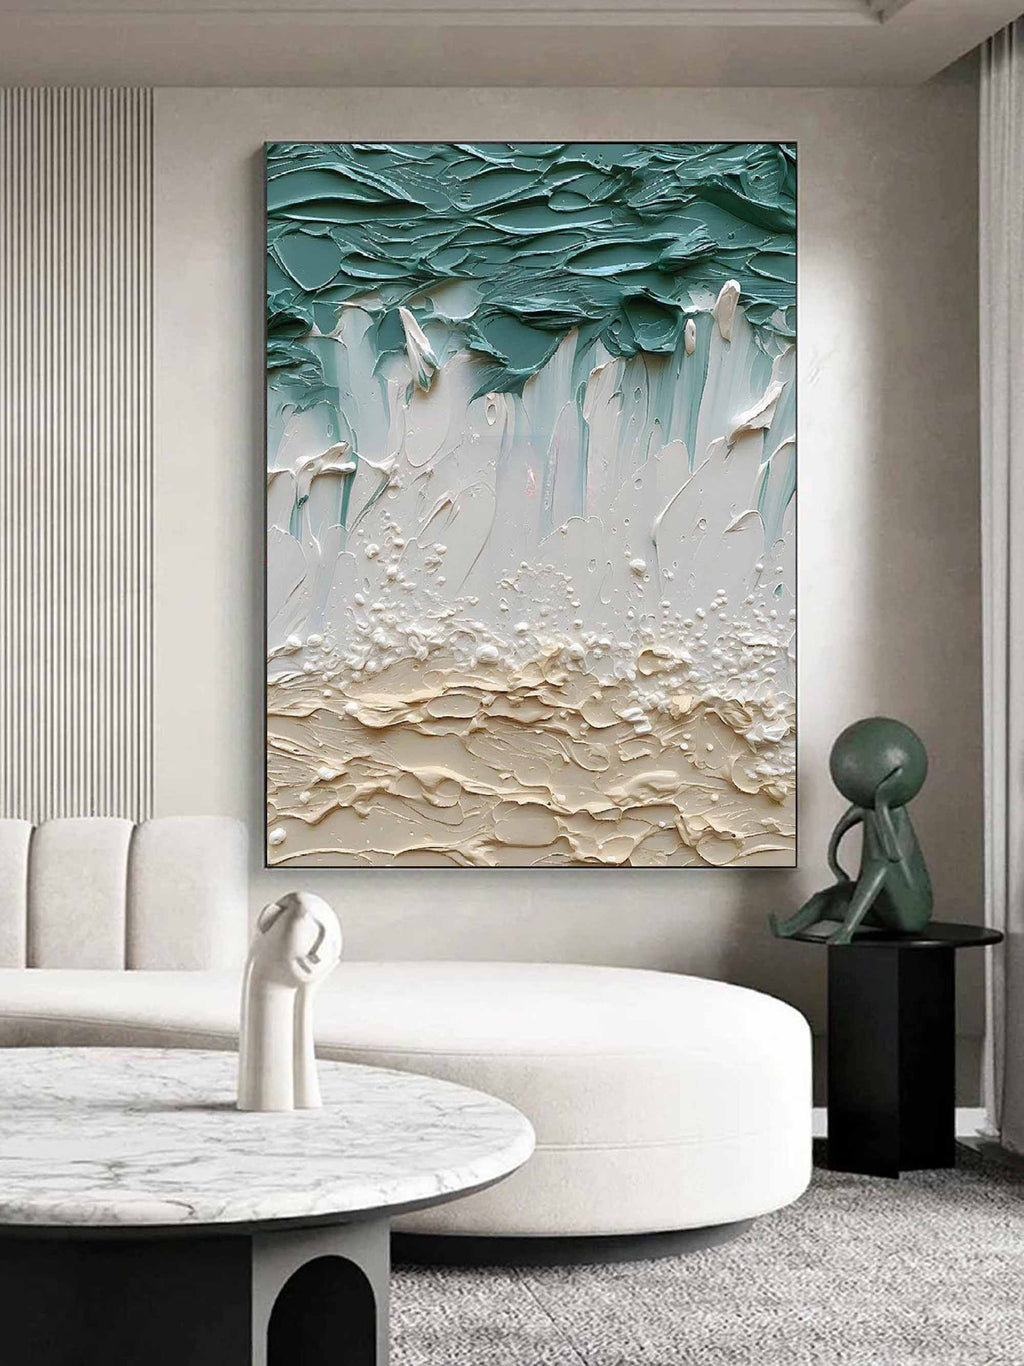 3D Green and White Canvas Art Thick Green and White Textured Abstract ...